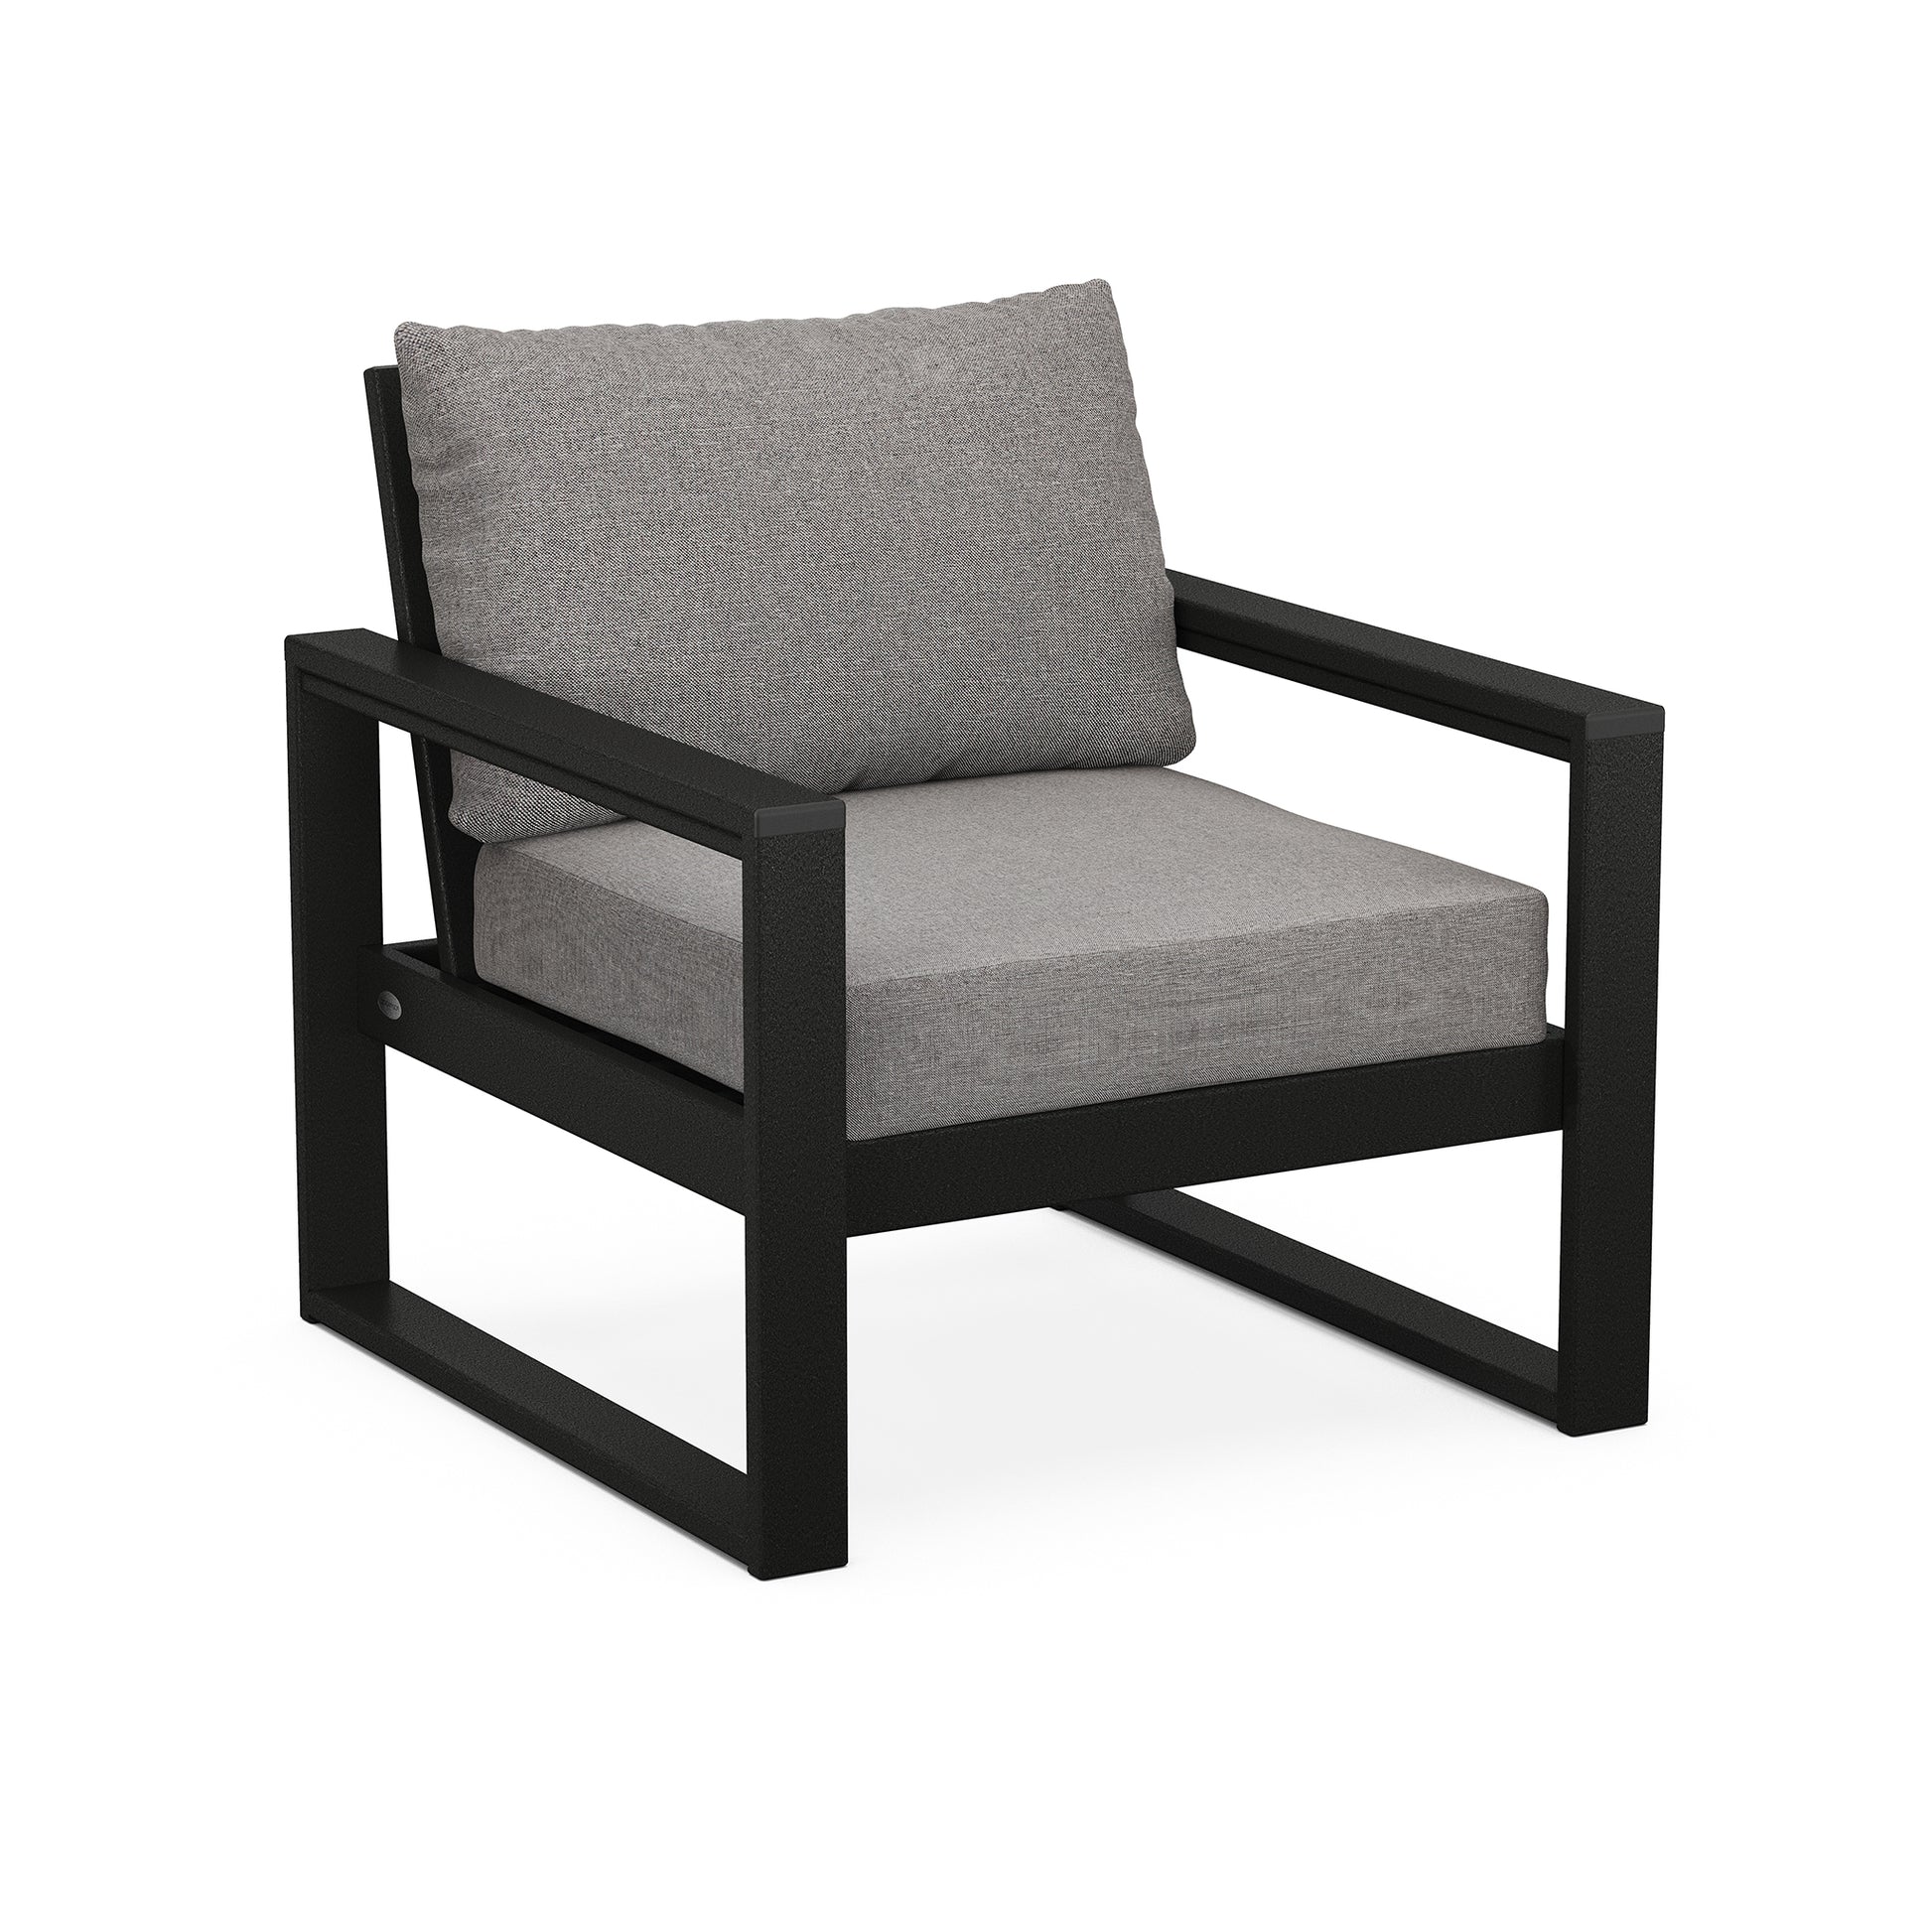 A modern POLYWOOD EDGE Club Chair with a black frame and light gray cushions, shown on a white background. The design features clean lines and a minimalist style.